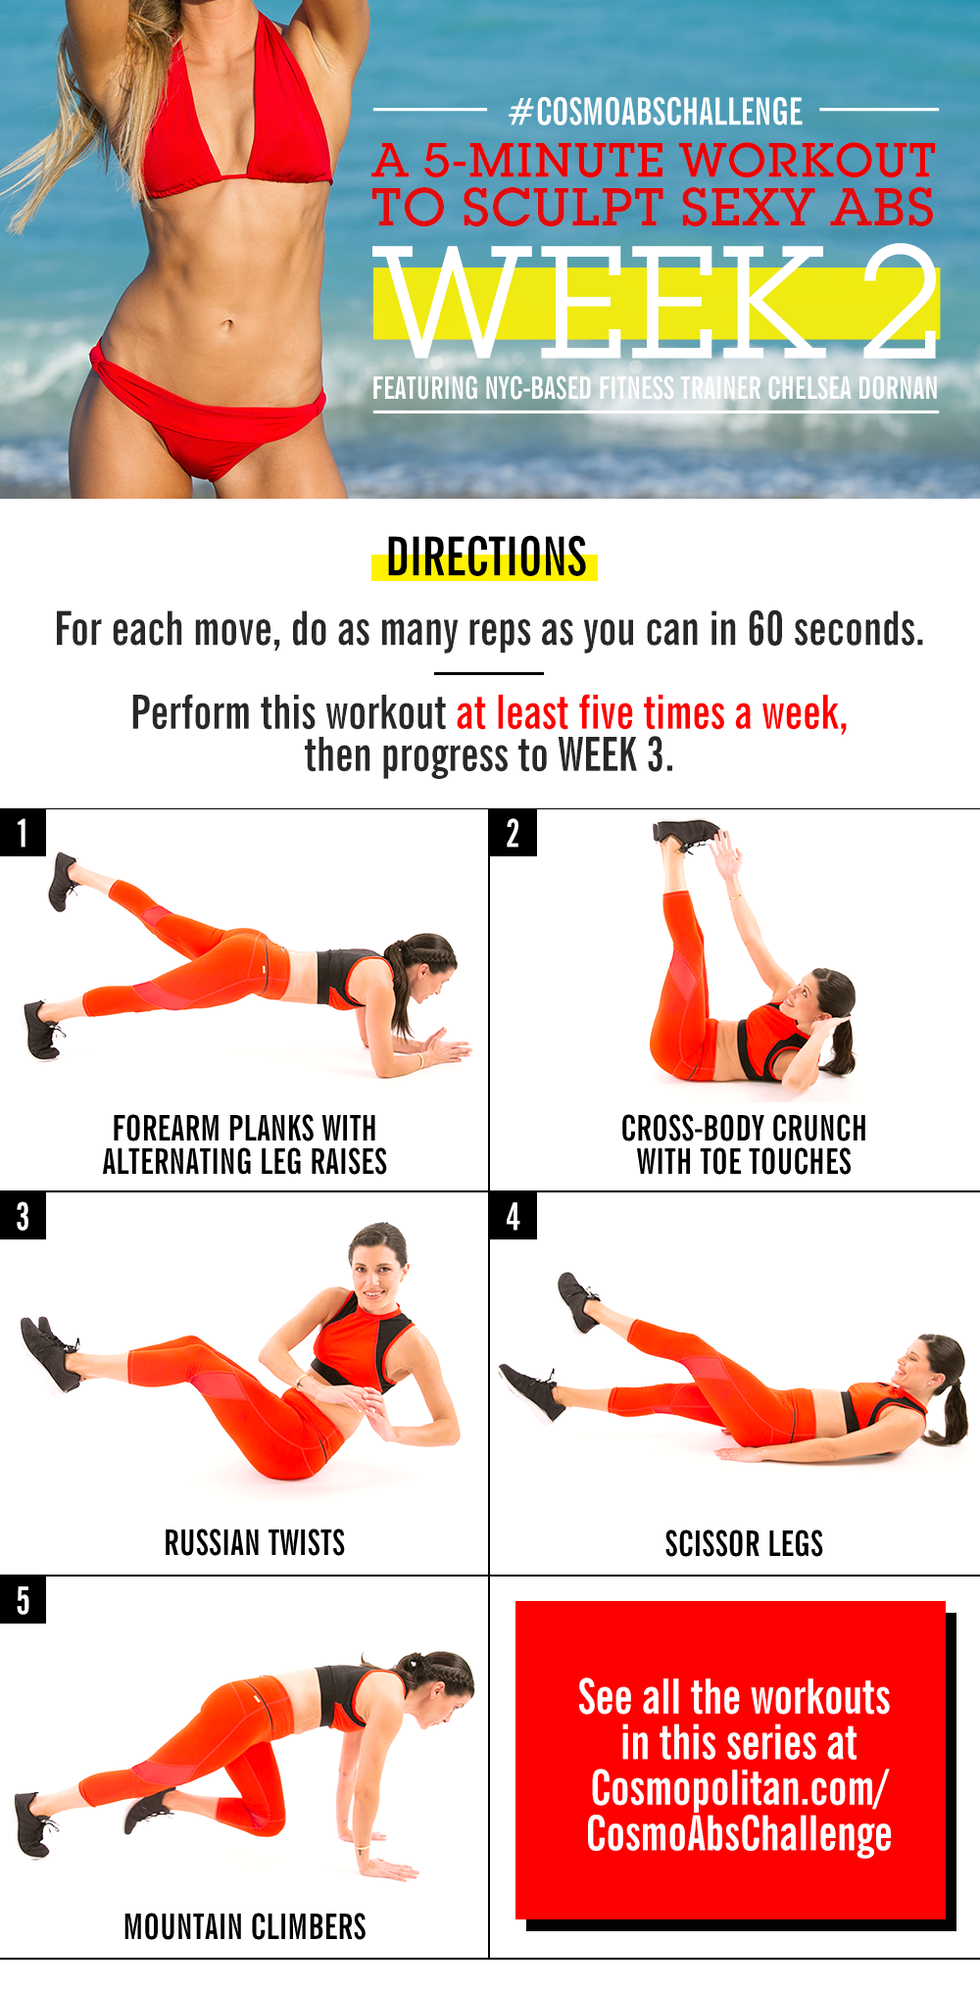 how to get a flat stomach in a week